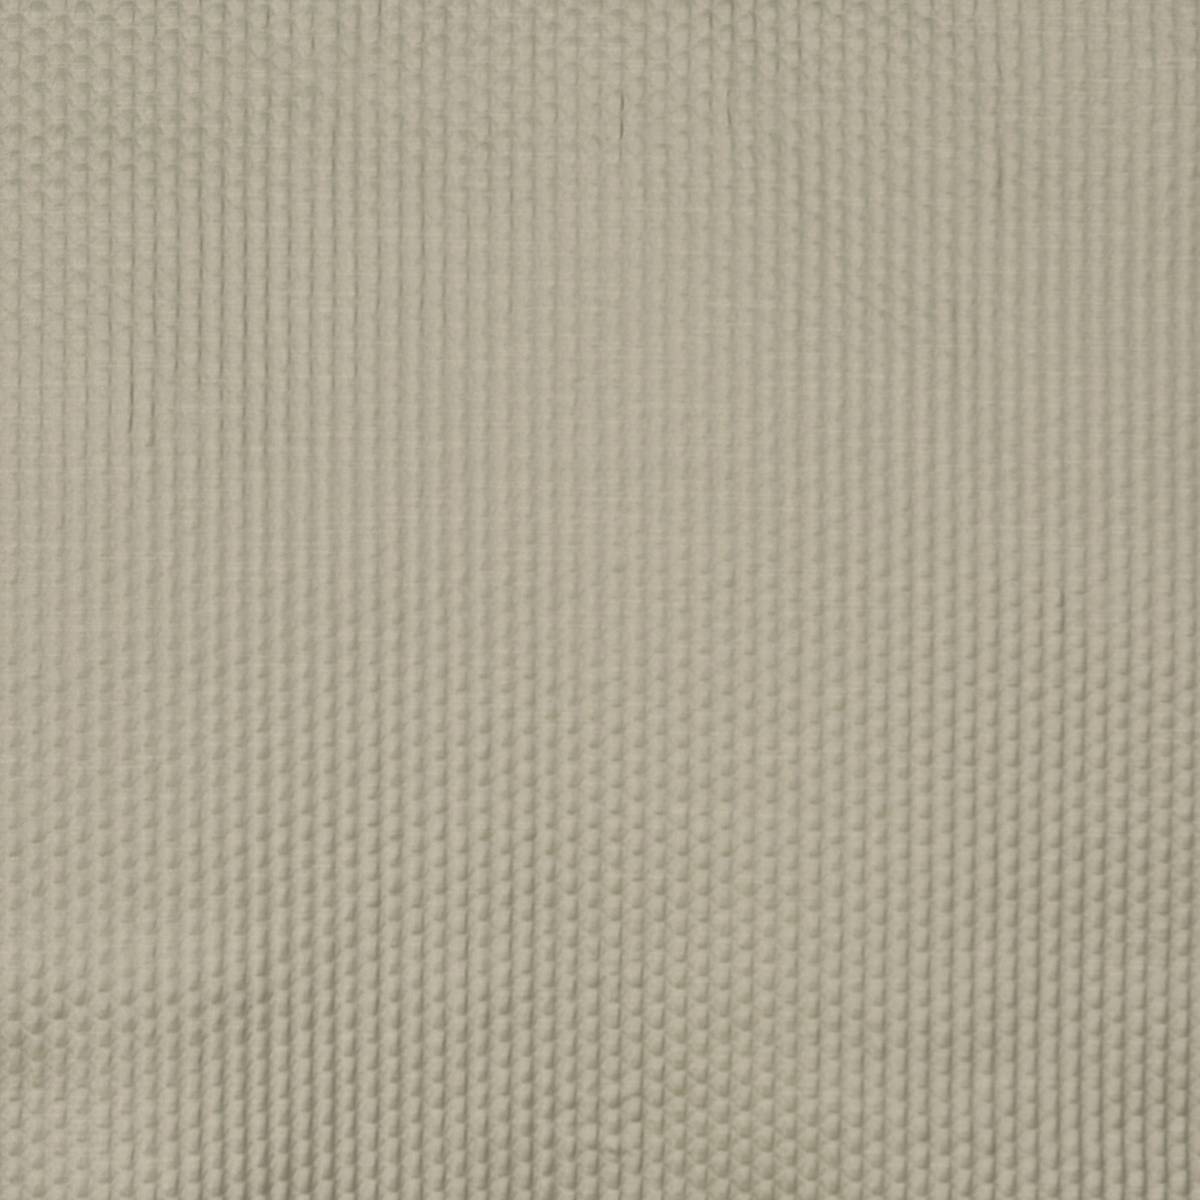 Emboss Feather Fabric by Prestigious Textiles